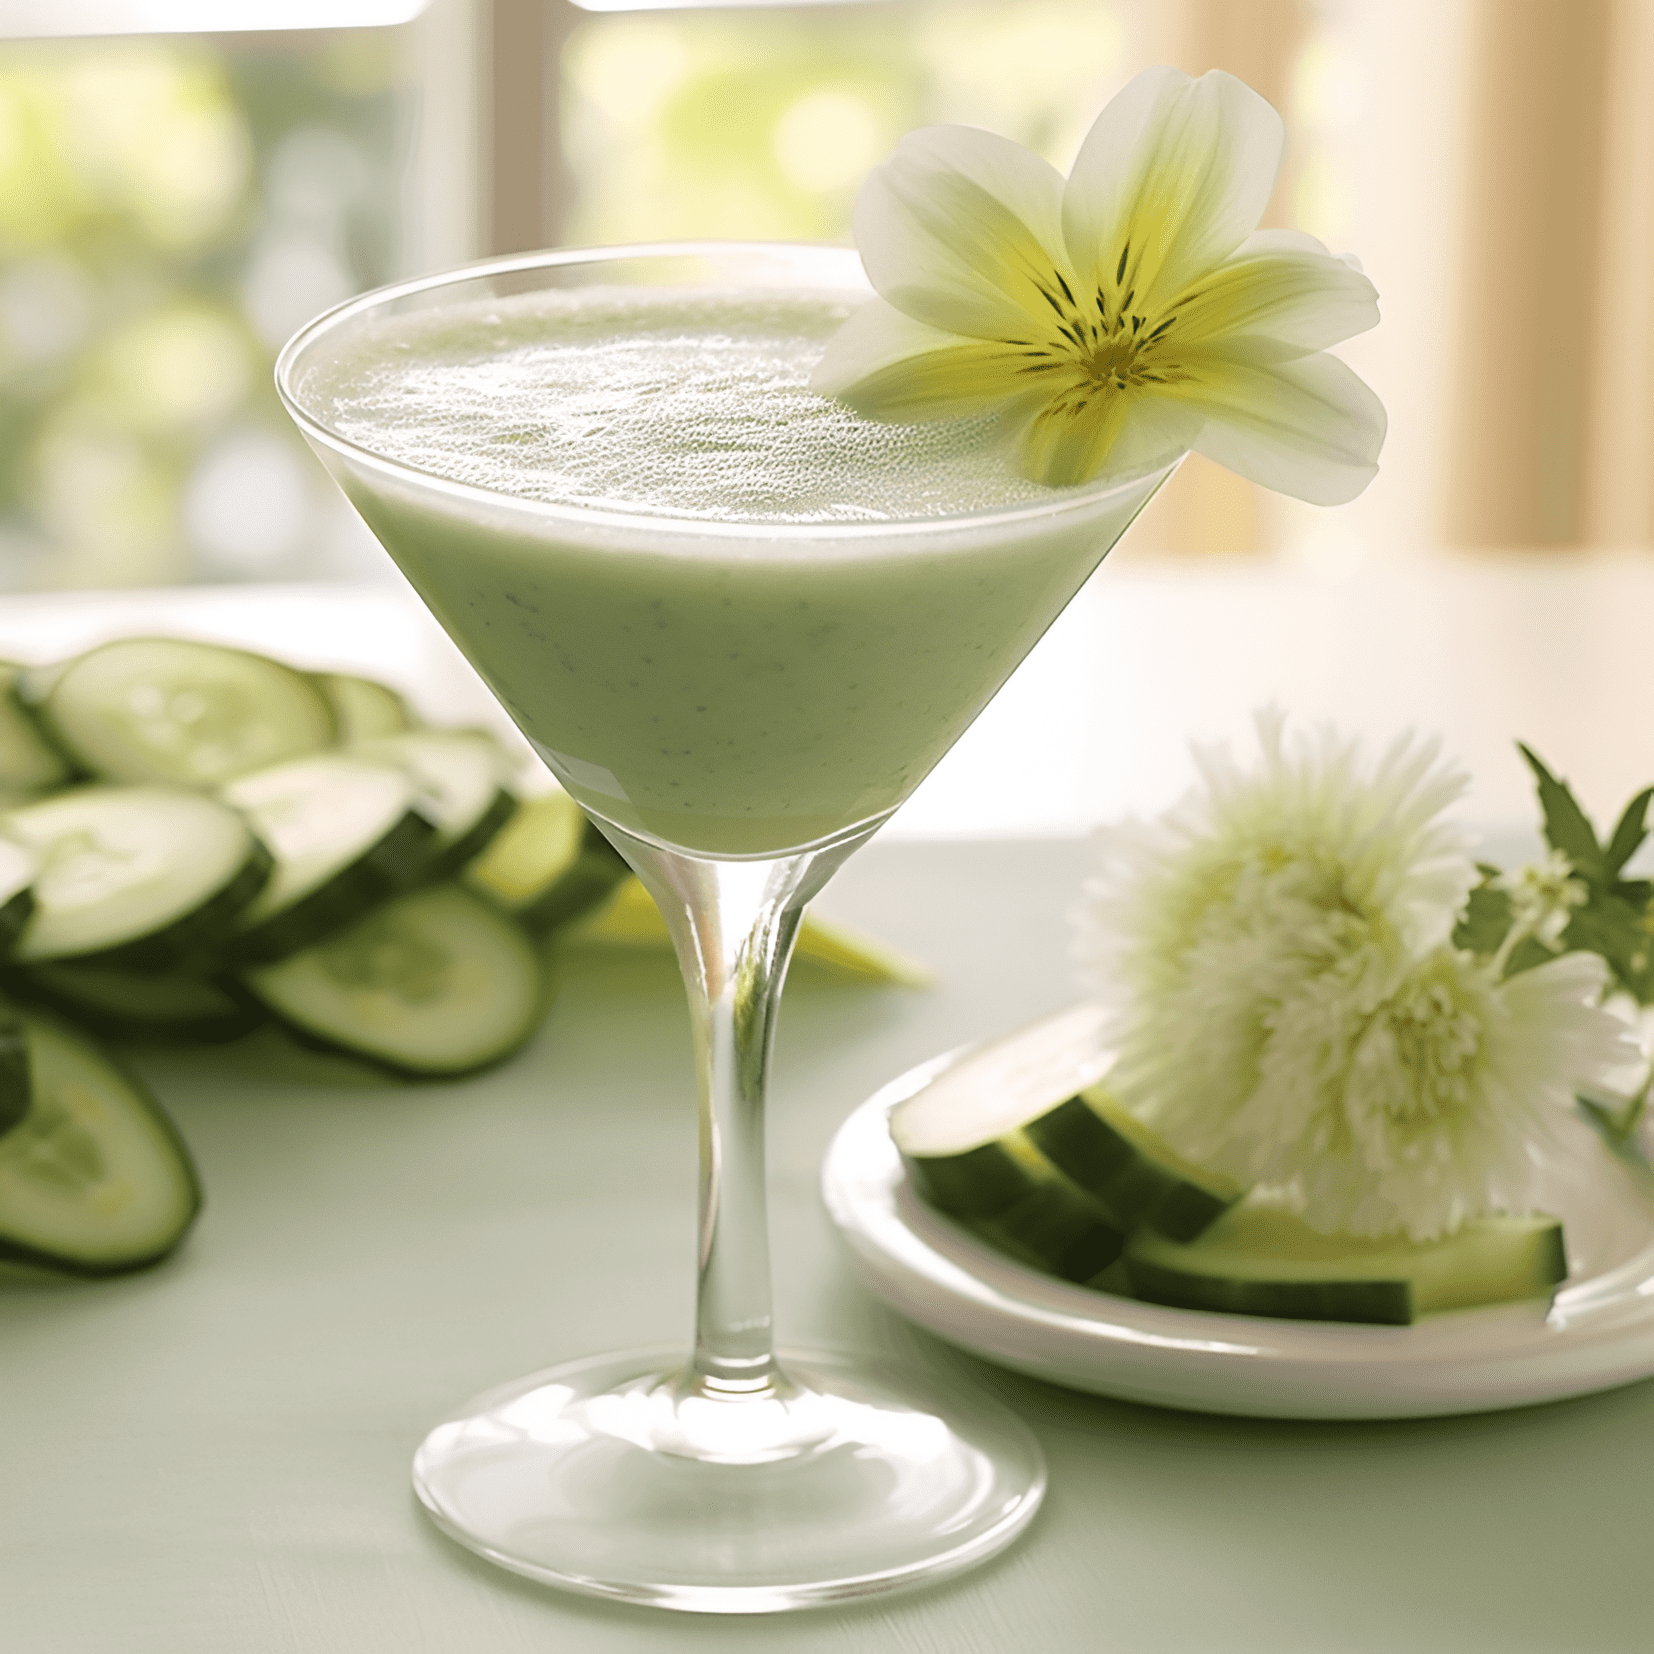 Cucumber Gimlet Cocktail Recipe - The Cucumber Gimlet has a light, crisp, and refreshing taste with a subtle sweetness. The combination of gin, lime juice, and cucumber creates a harmonious balance of flavors, while the simple syrup adds just the right amount of sweetness to complement the tartness of the lime.